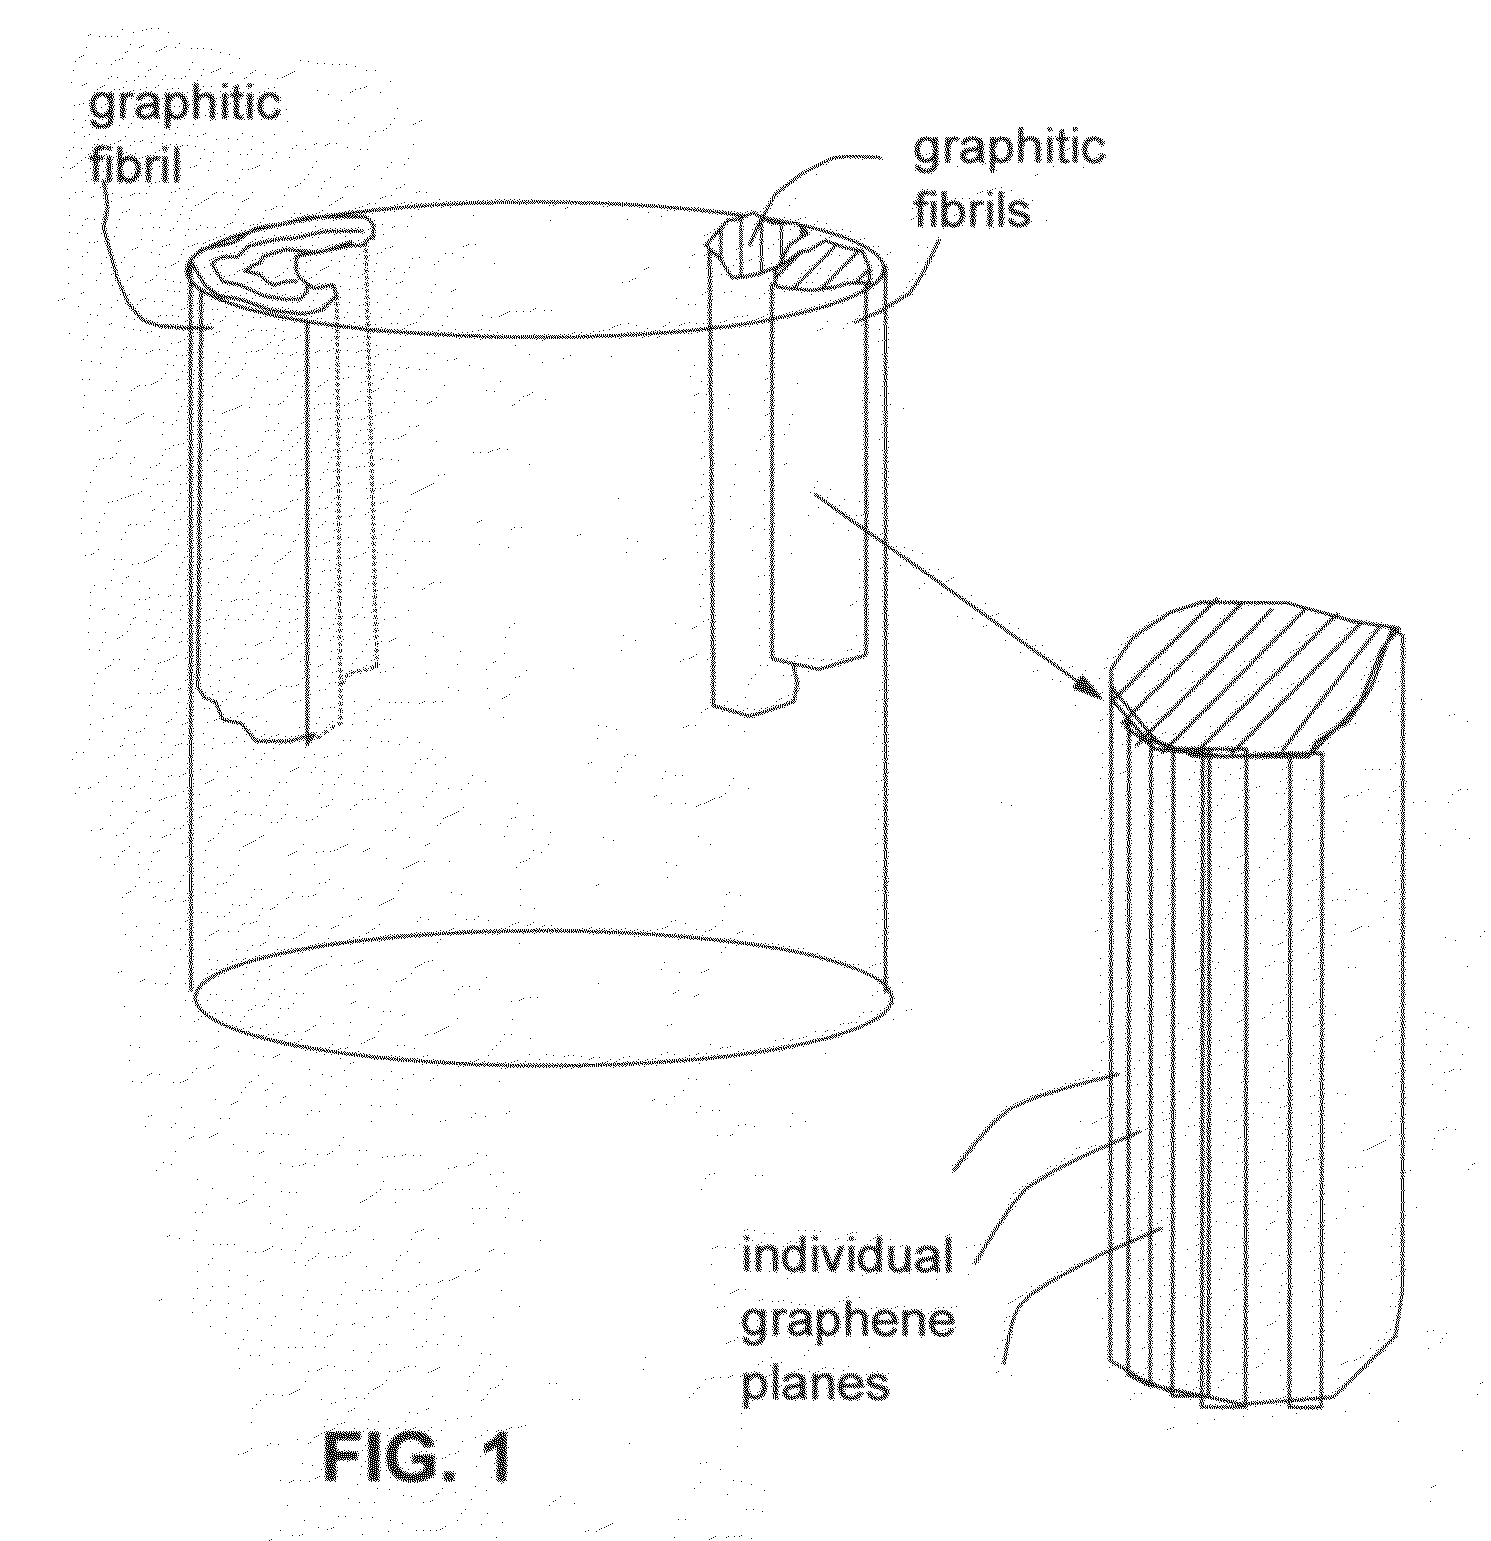 Chemically functionalized submicron graphitic fibrils, methods for producing same and compositions containing same